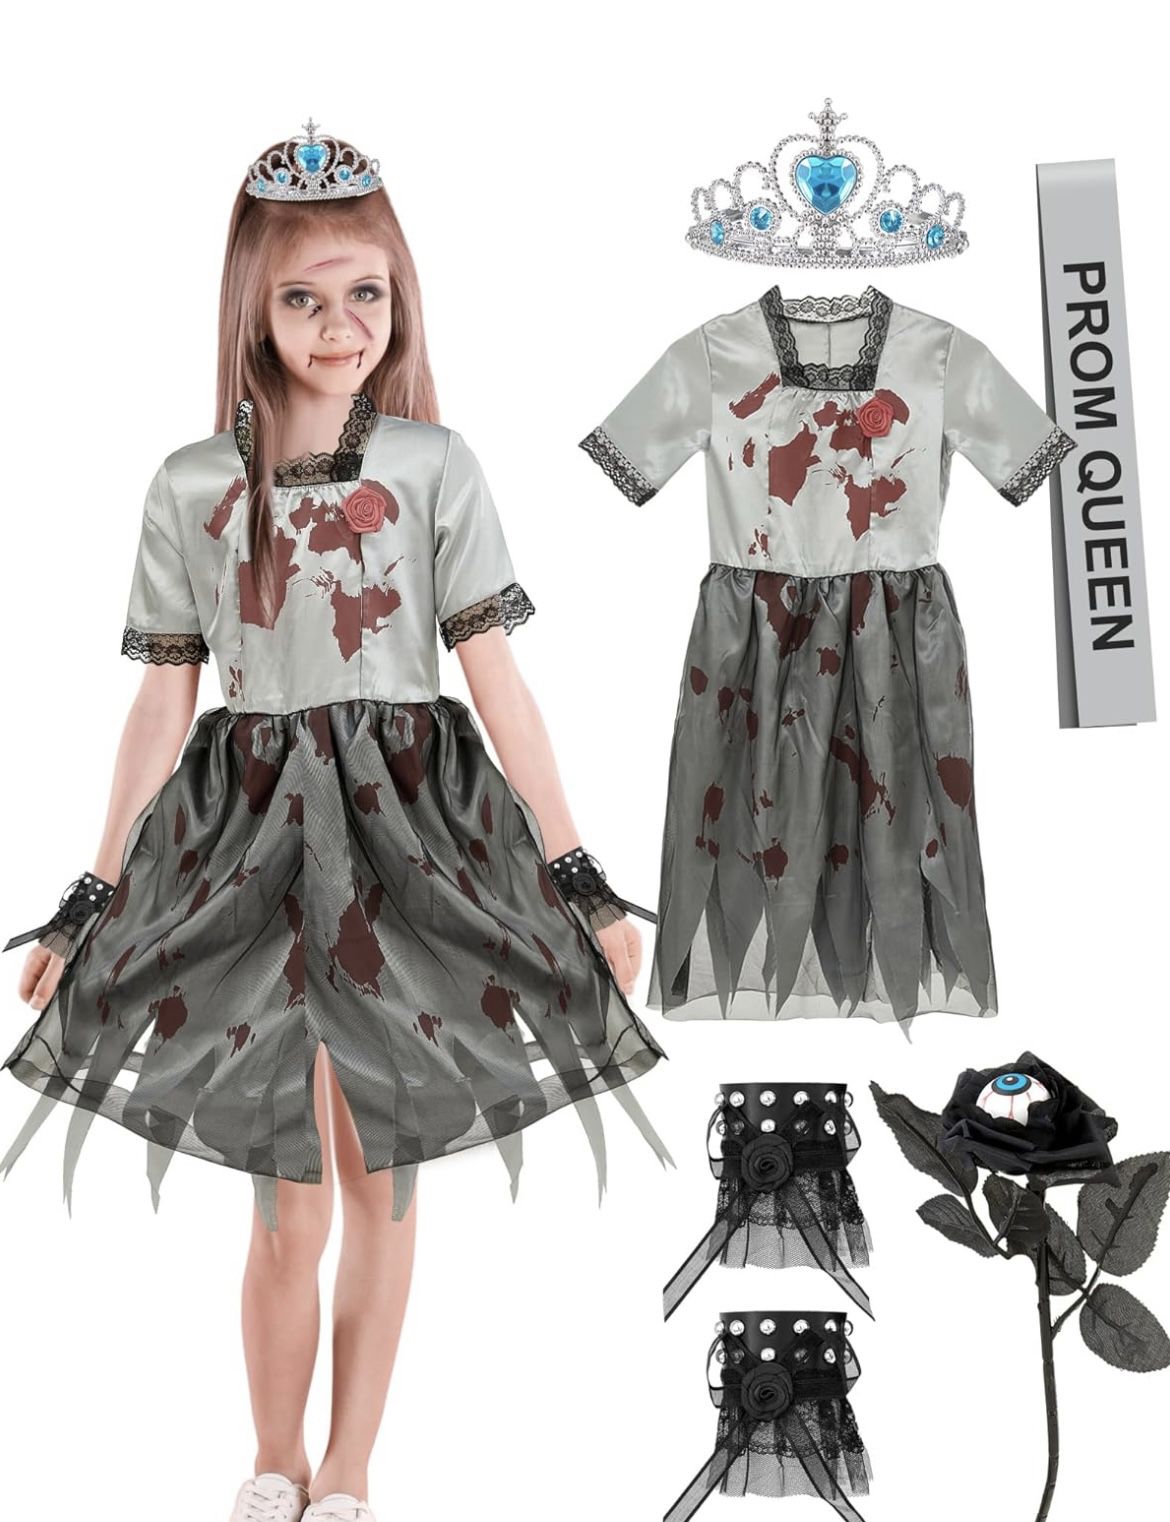  Bloody Prom Queen Costume Kit Halloween Cosplay Zombie Prom Queen Child Costume Dress Crown Sash Rose Bracelet